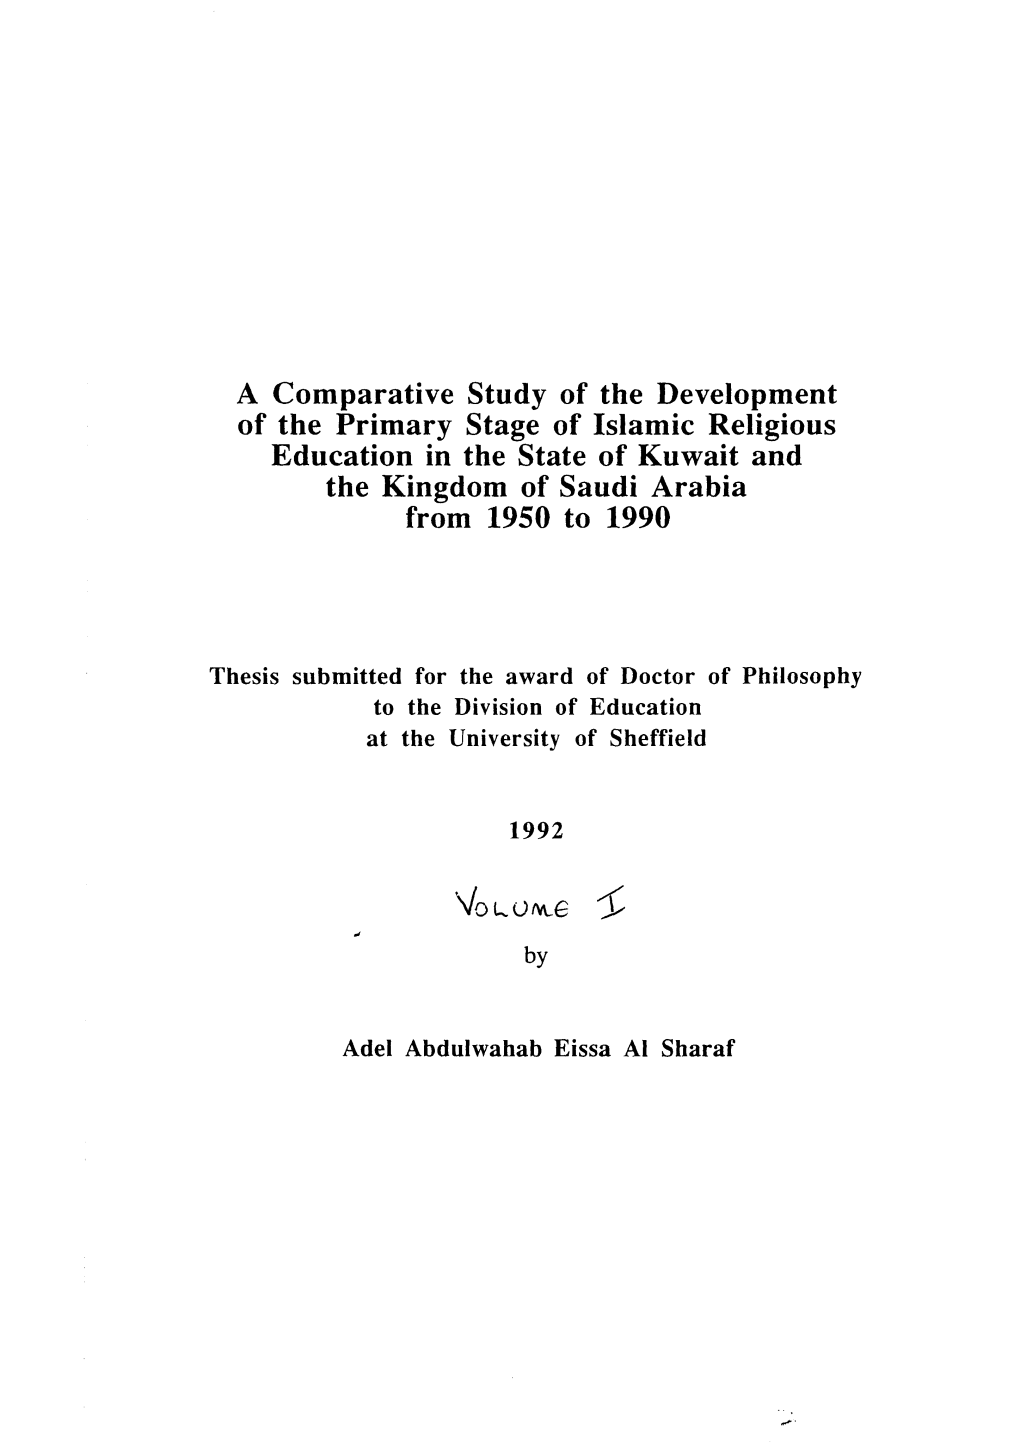 A Comparative Study of the Development of the Primary Stage of Islamic Religious Education in the State of Kuwait and the Kingdom of Saudi Arabia from 1950 to 1990